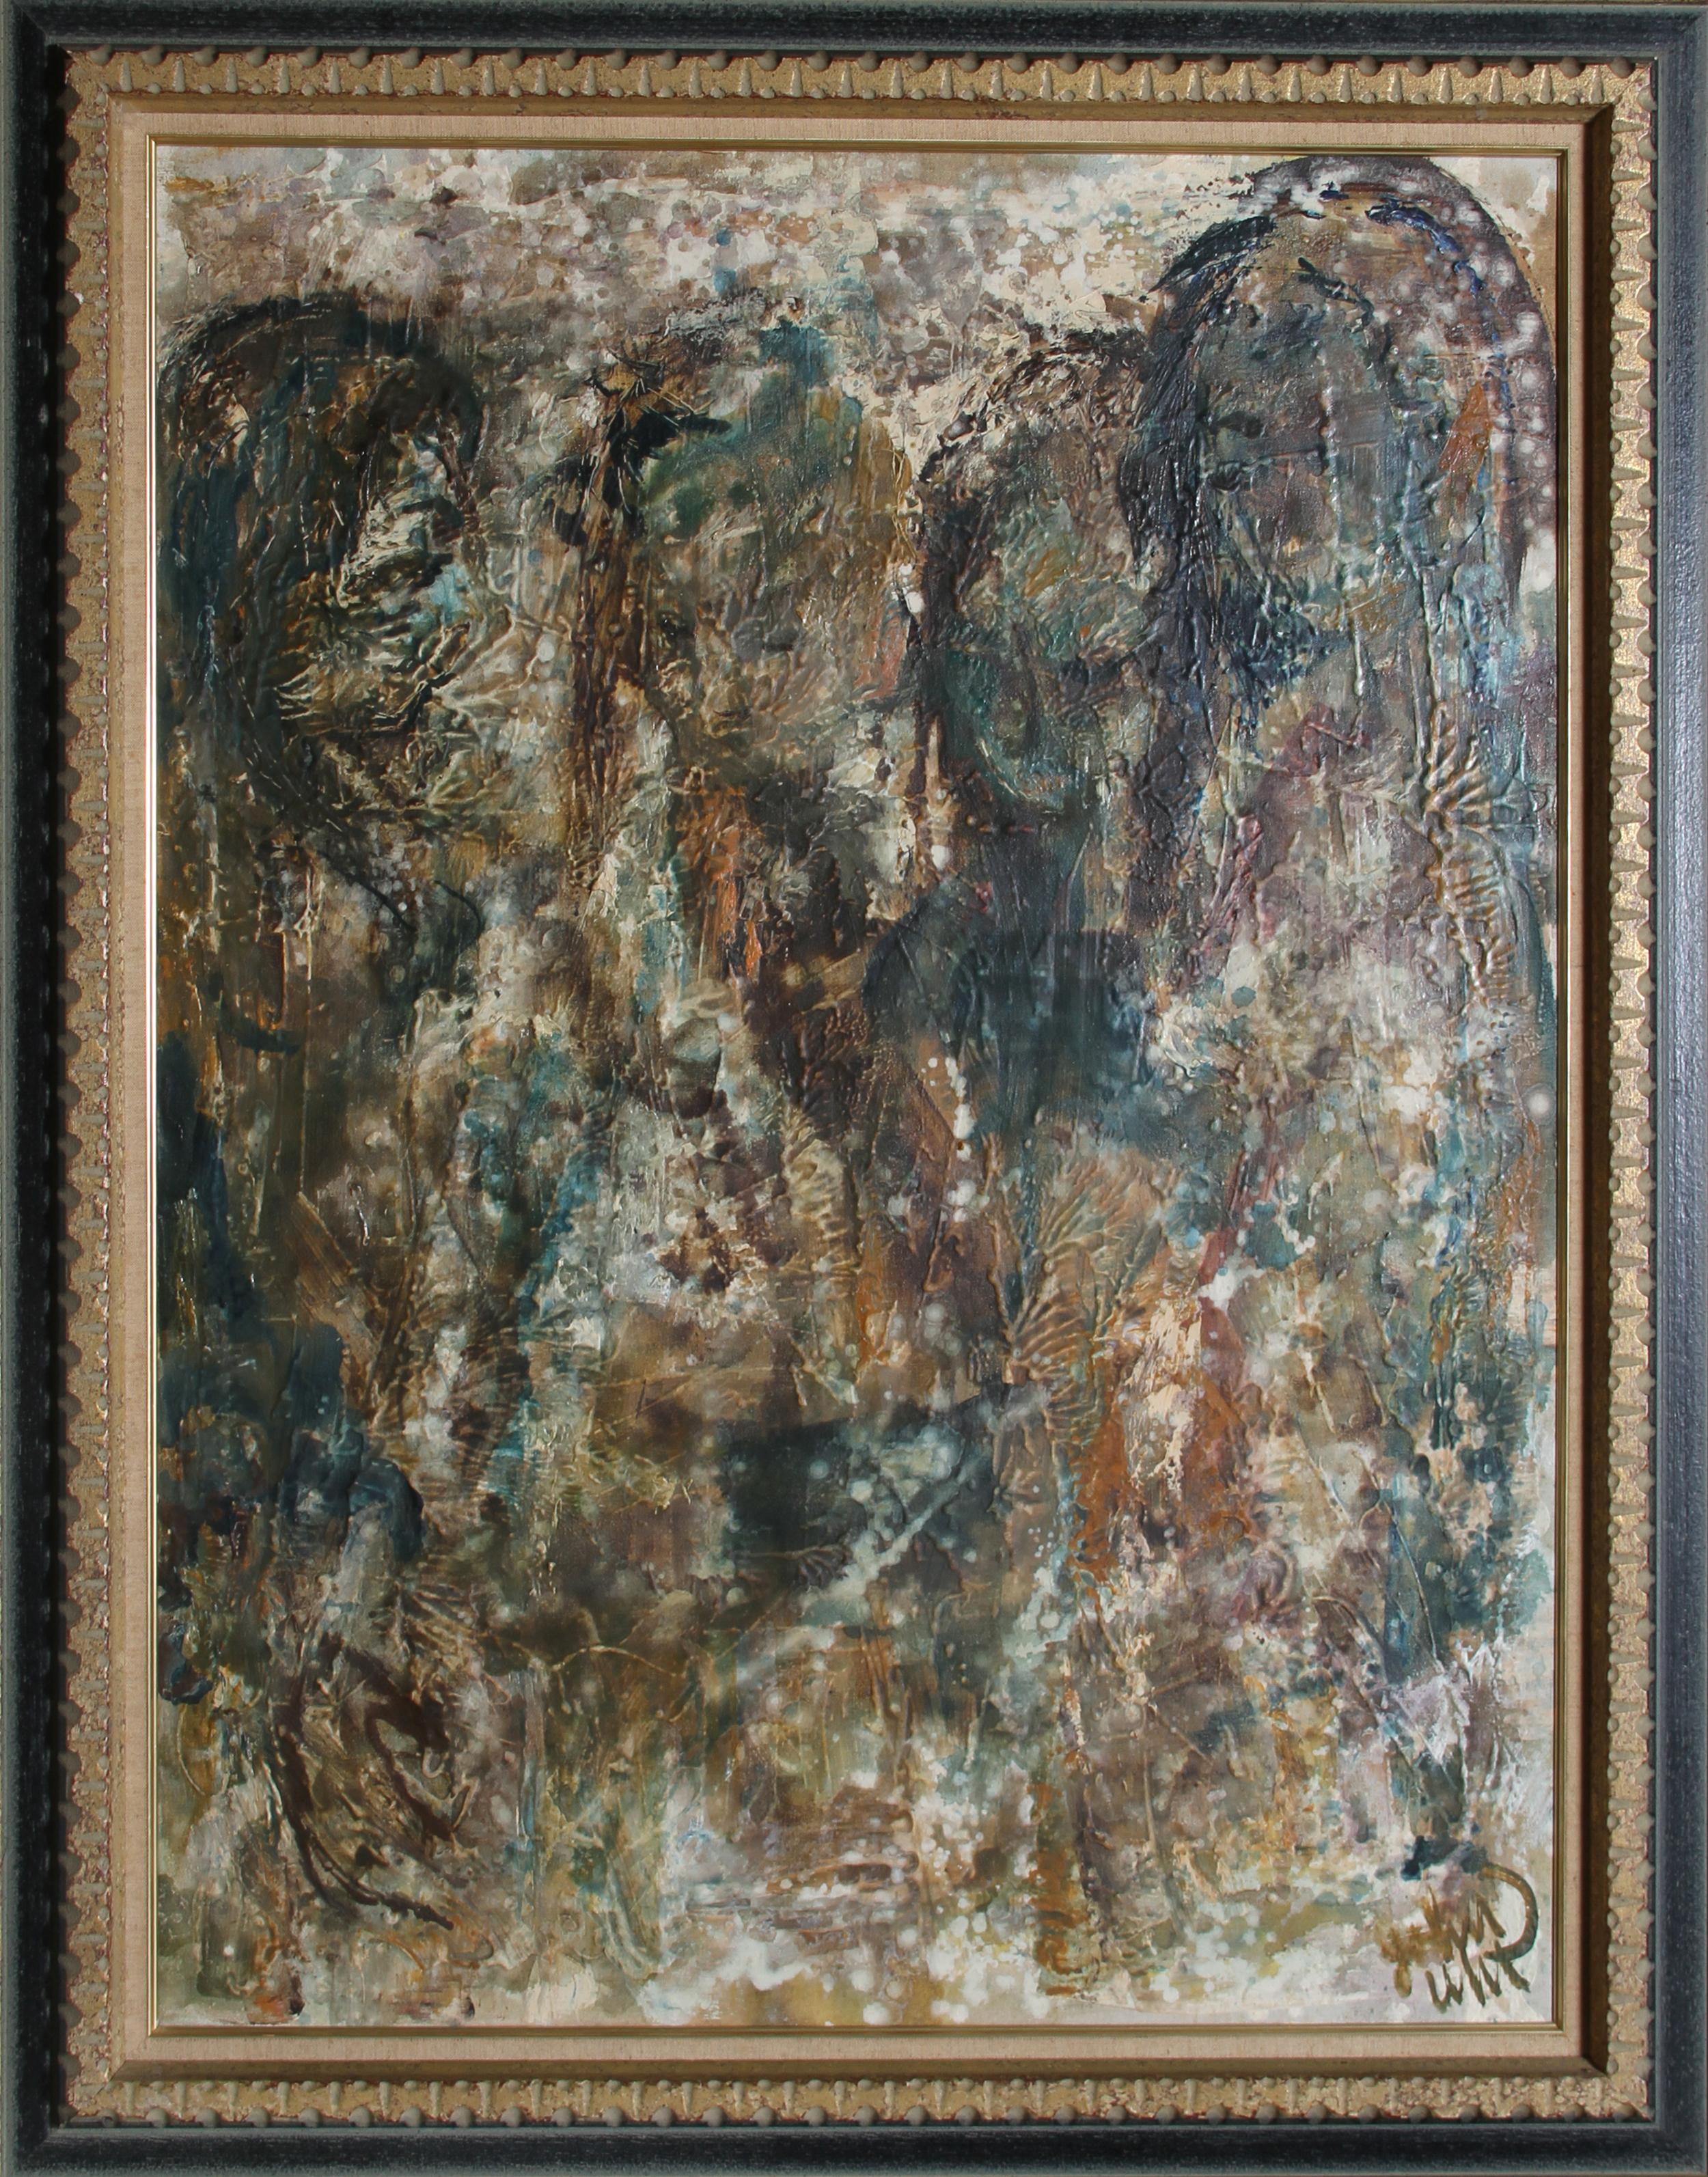 Four Abstract Figures, Oil Painting by John Uht